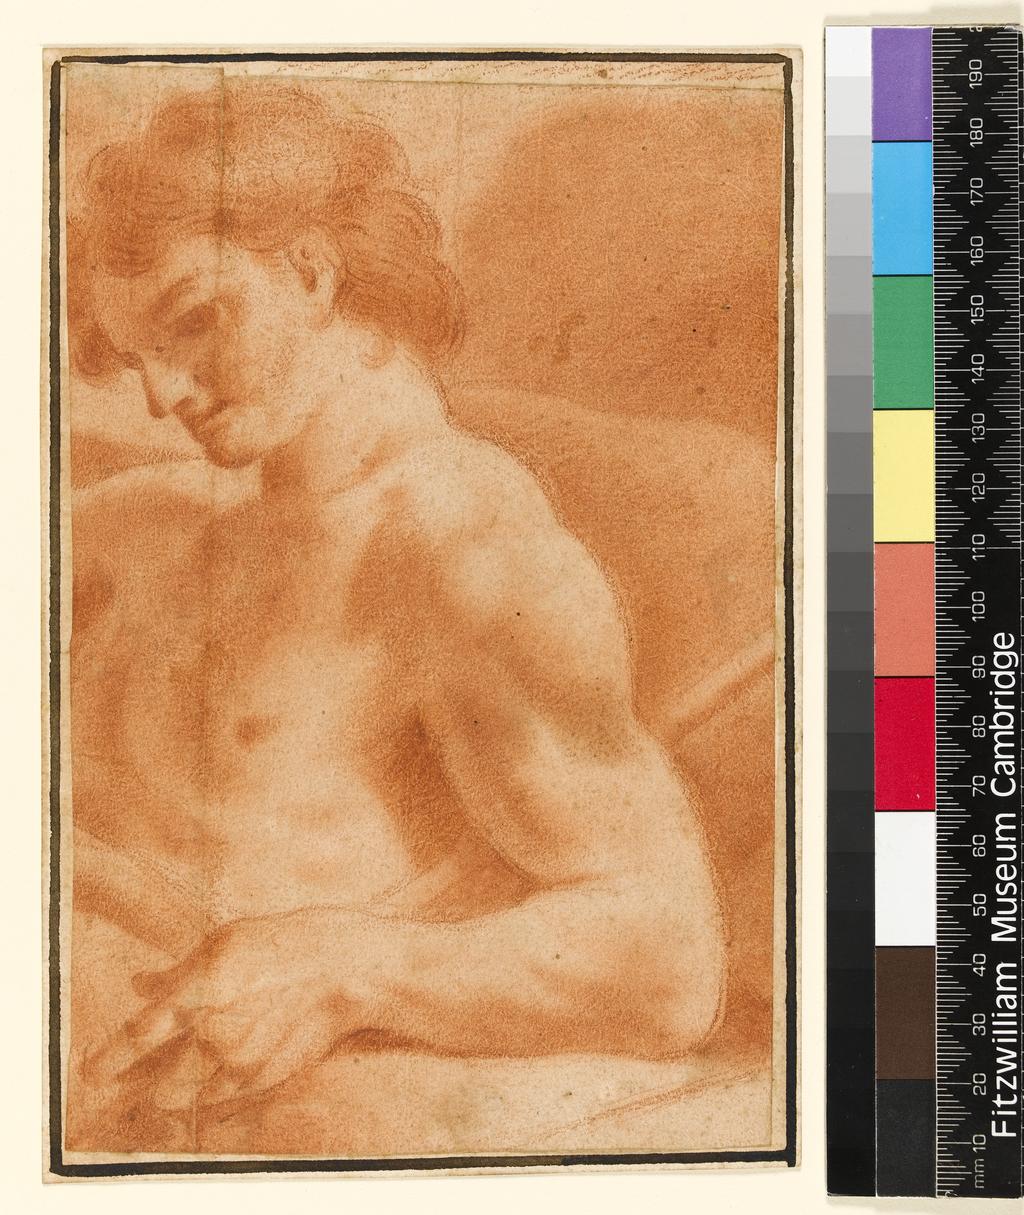 An image of SCHEDONI, Bartolommeo, attributed to. Modena 1578-1615 ParmaSt John the BaptistRed chalk184 x 122 mm [maximum] cut down on at least three sides